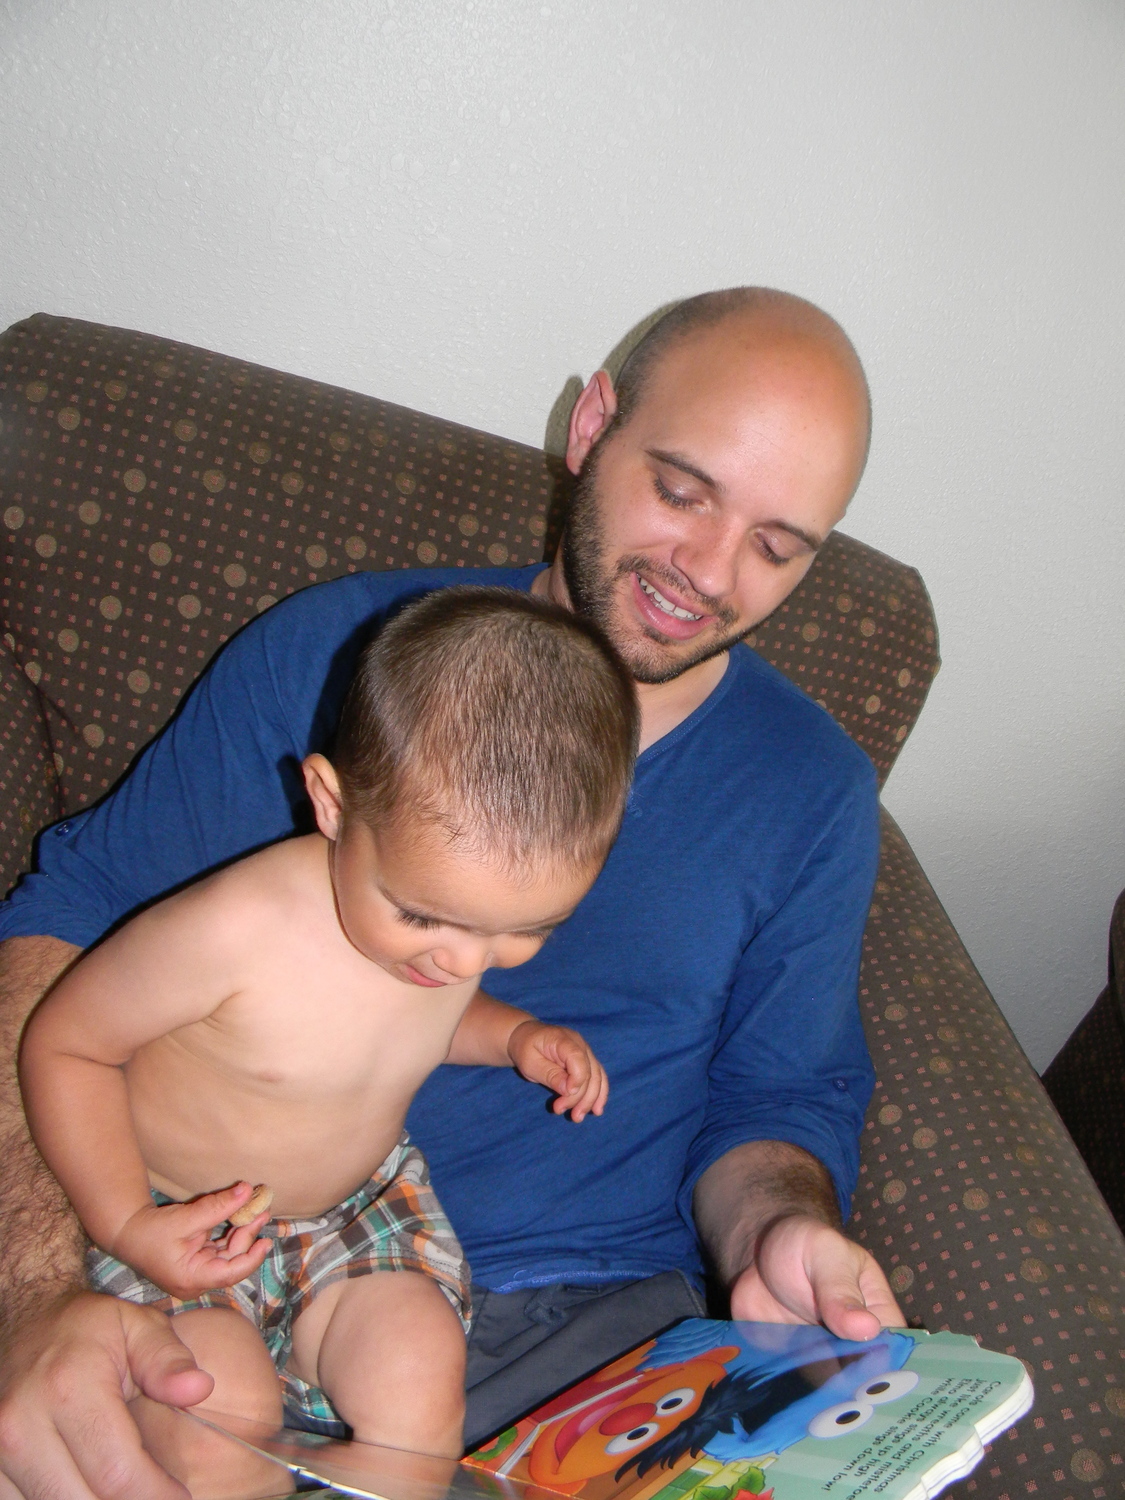 Father&son pic #1: Reading Judah's new favorite Elmo book